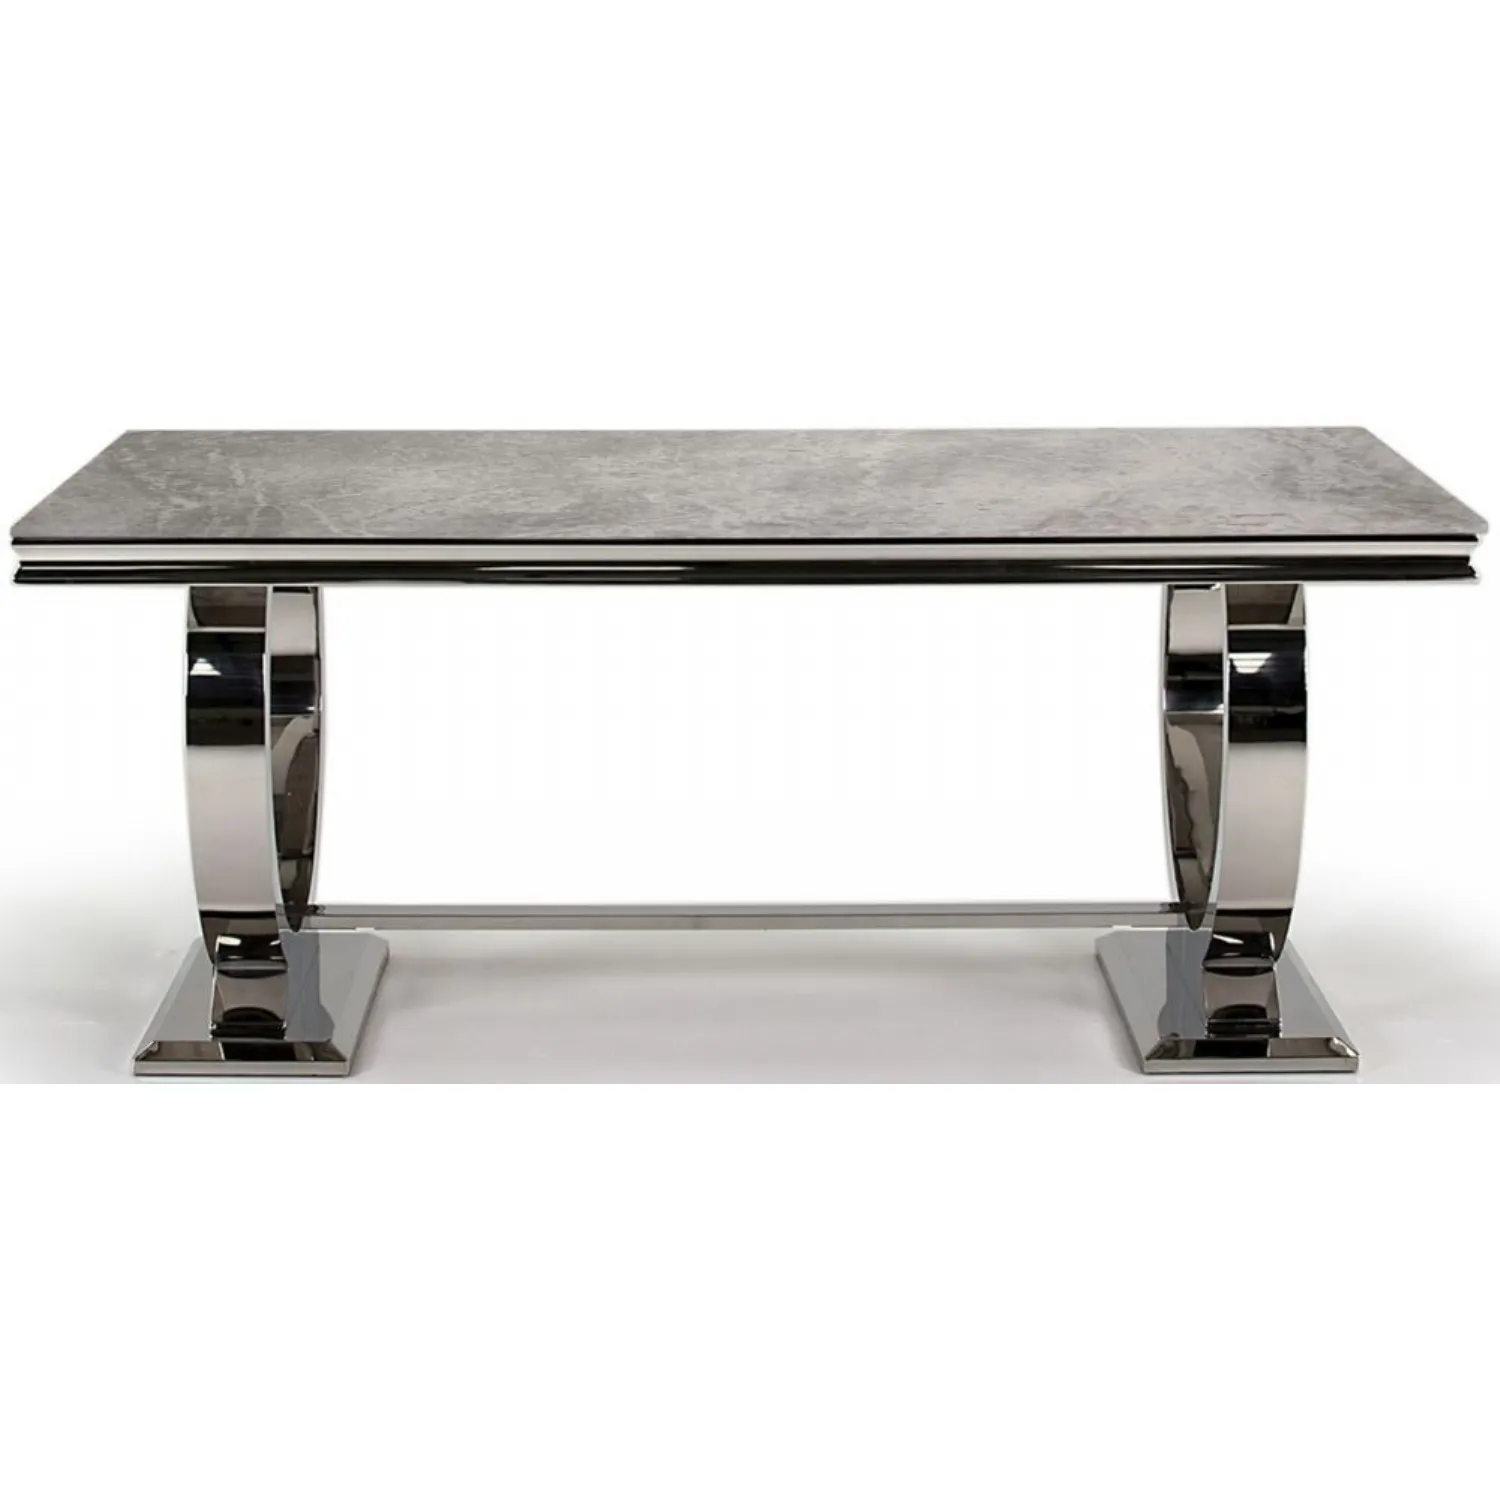 Large Dining Table Grey Marble Top Stainless Steel Base